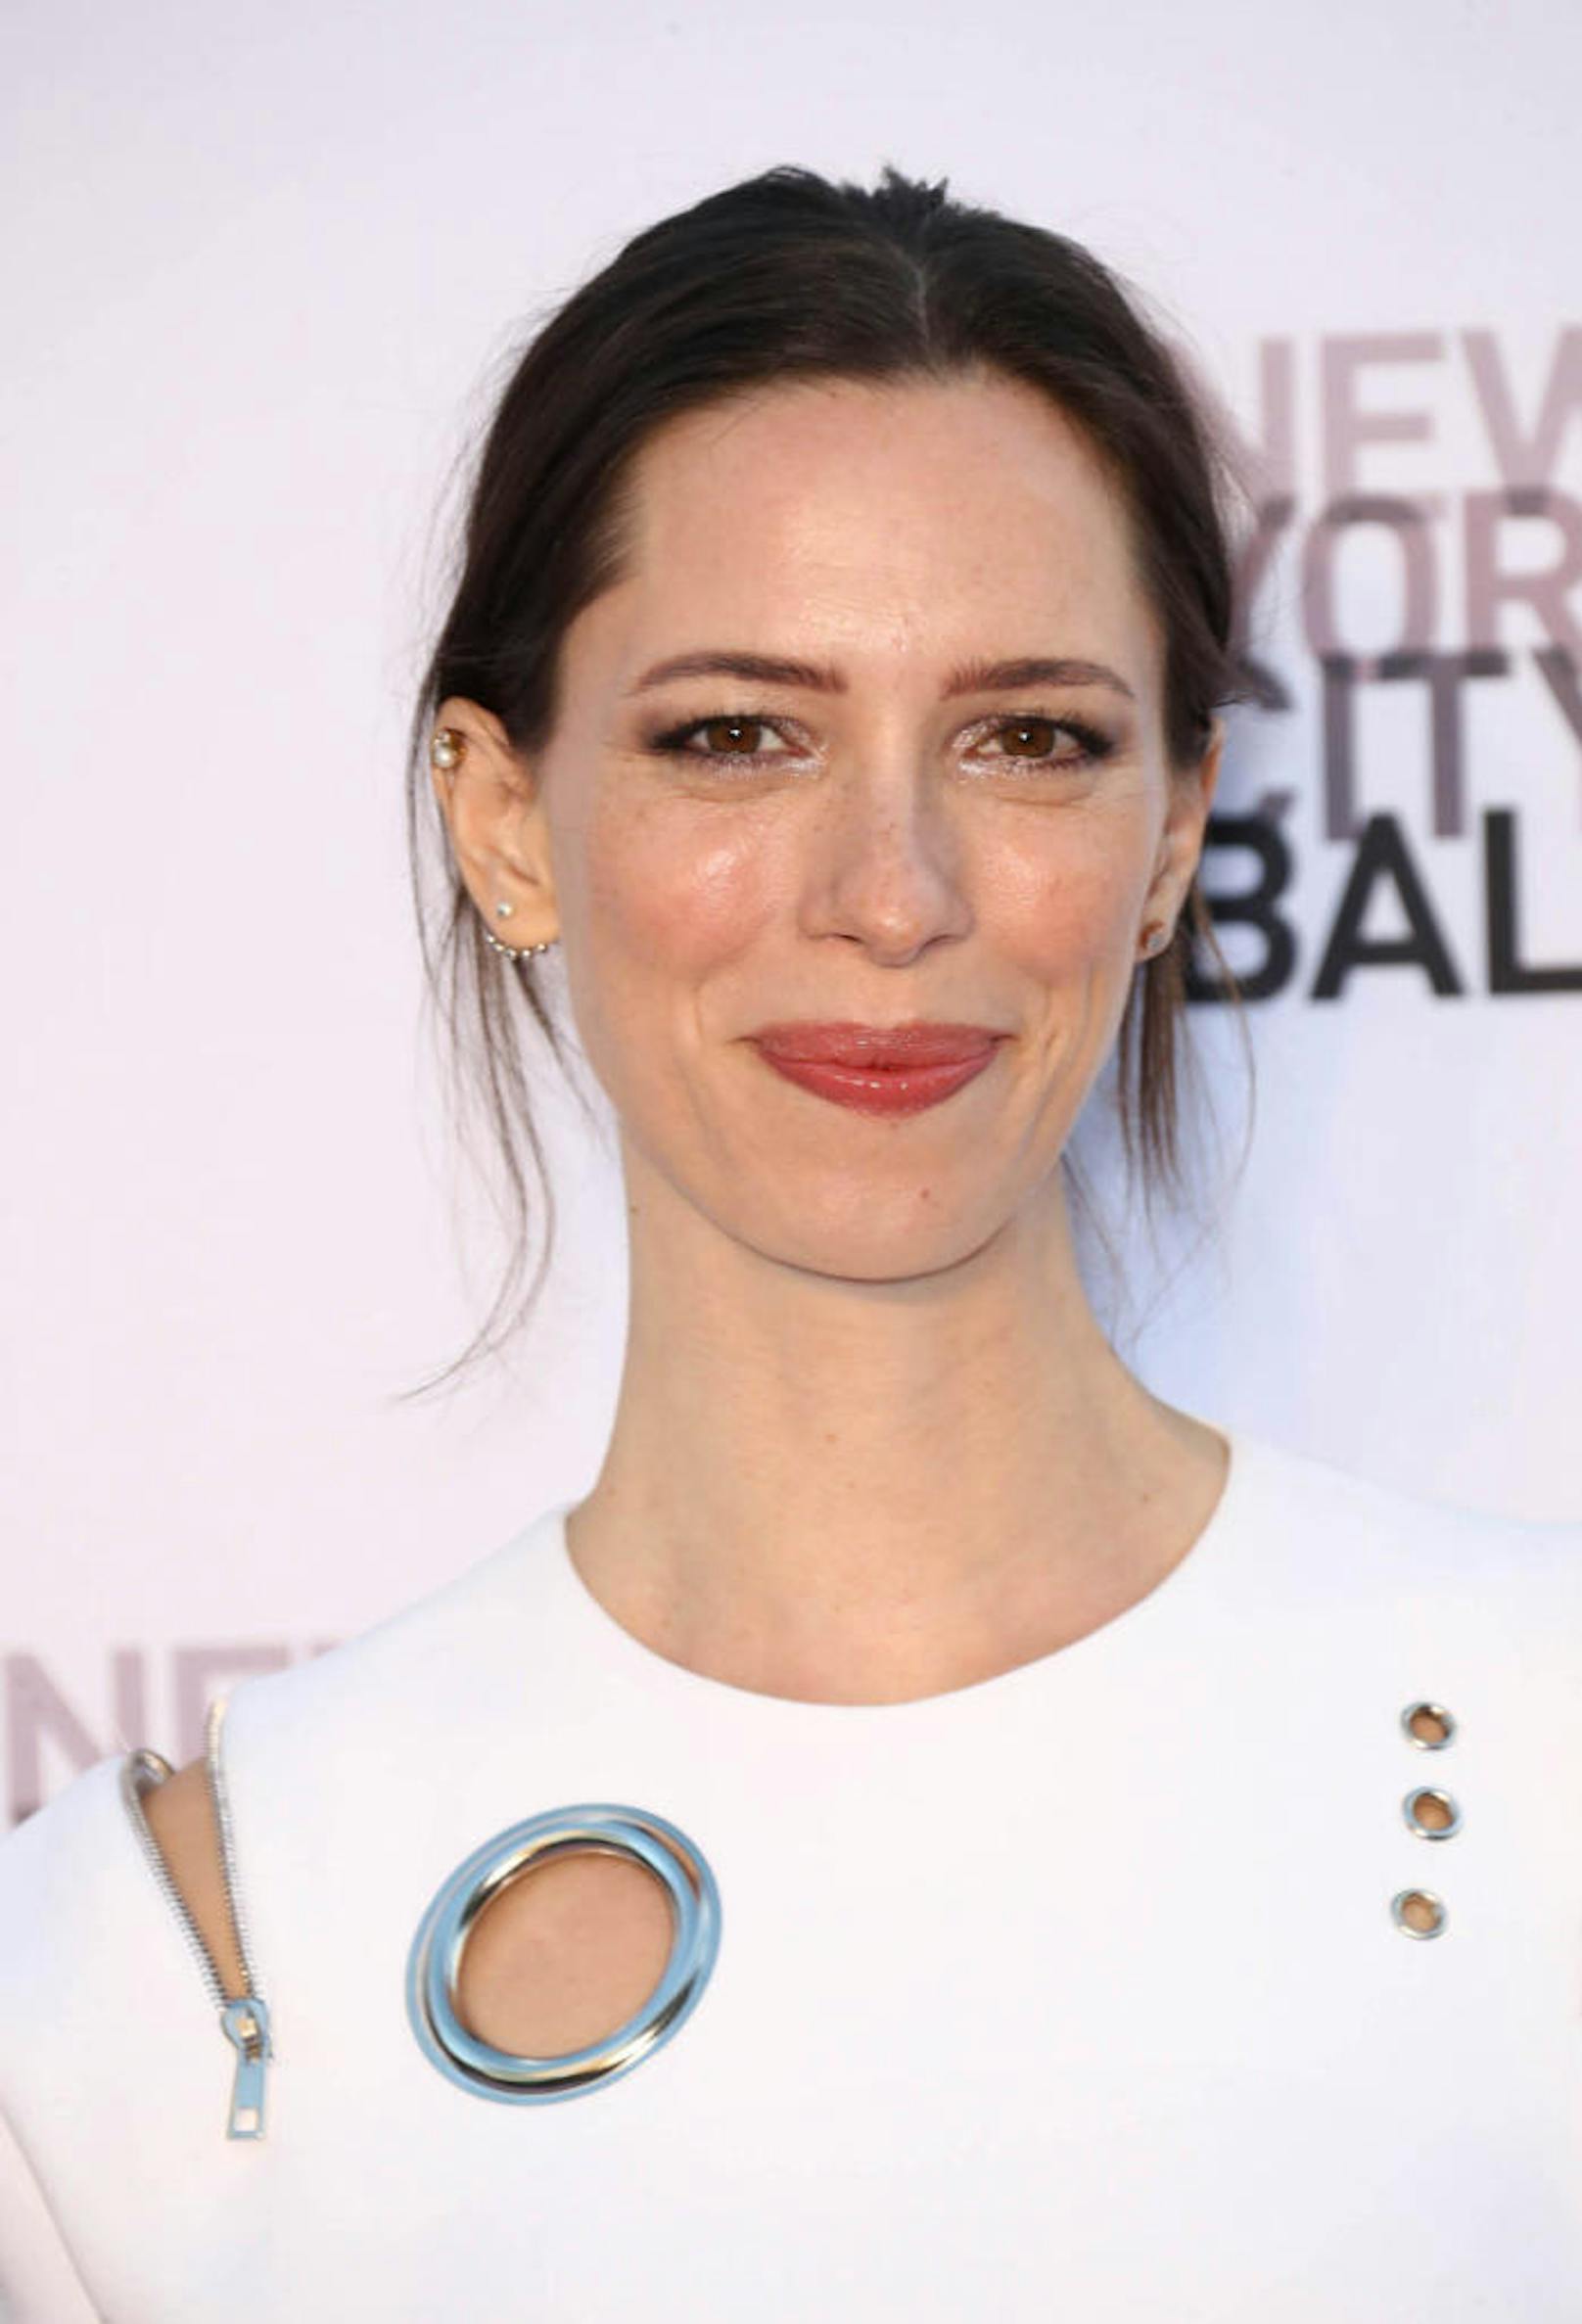 Rebecca Hall am Red Carpet in New York